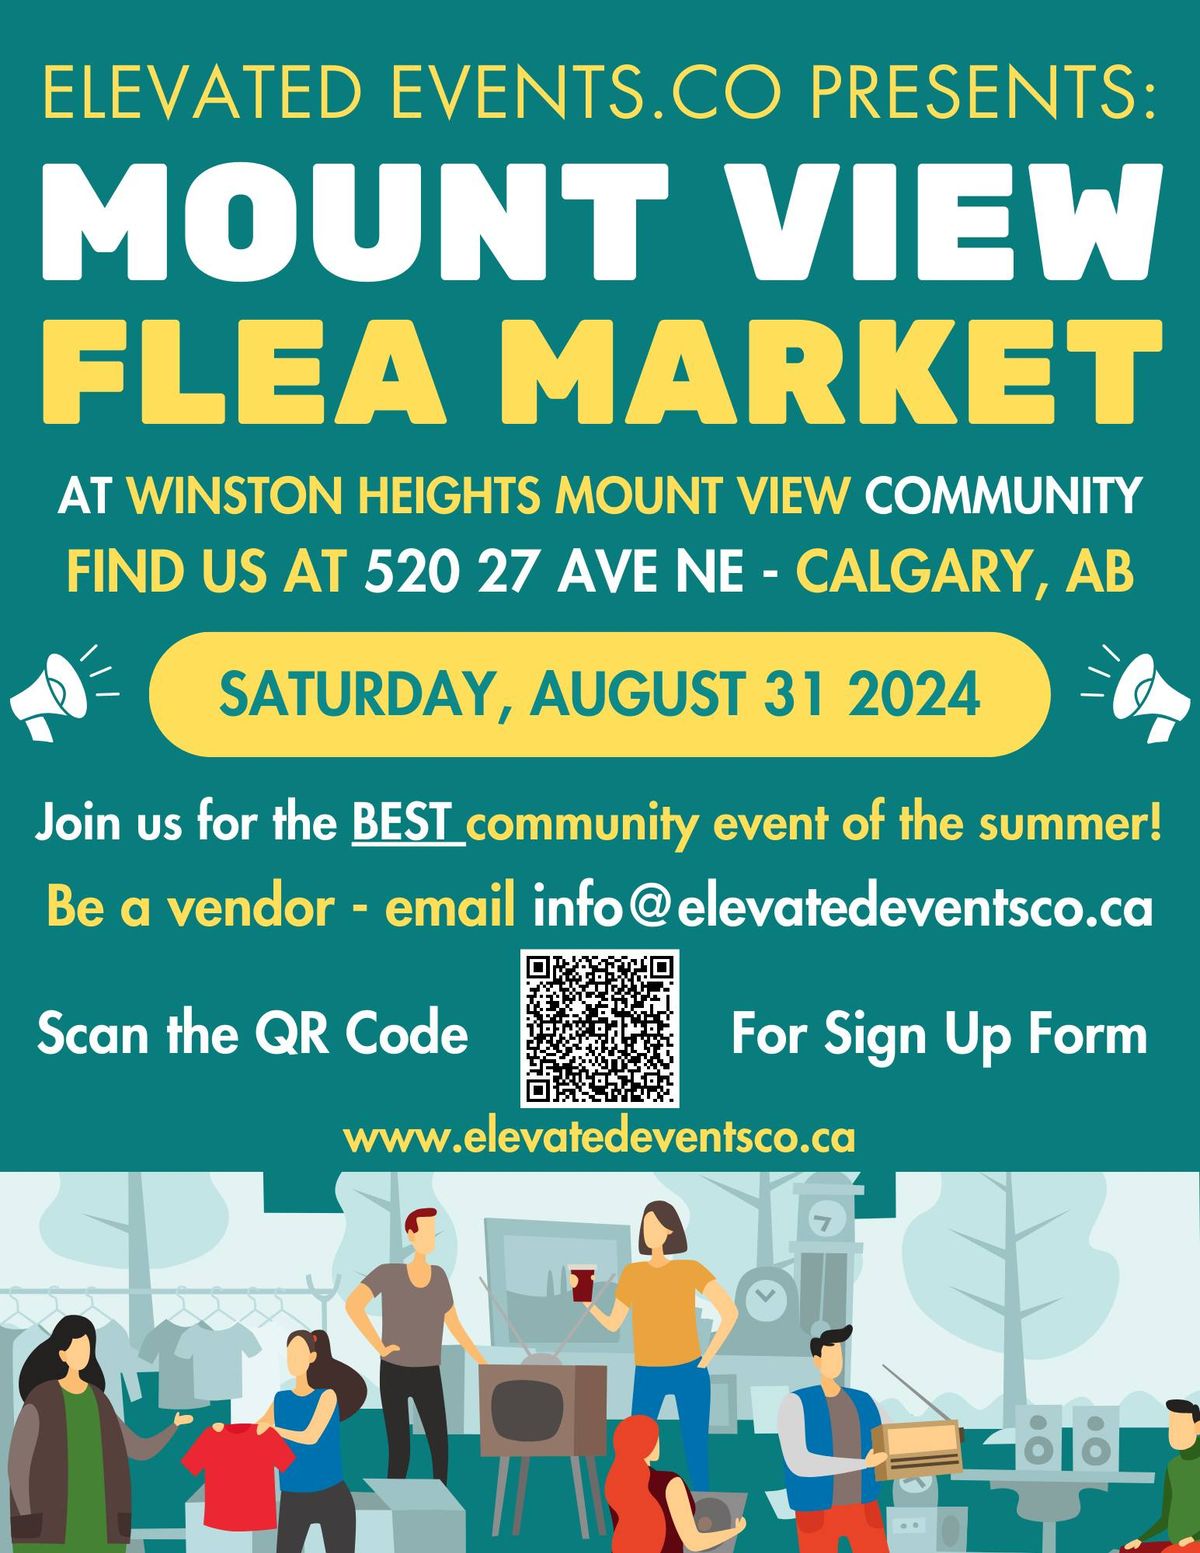 Mount View Flea Market (Presented By Elevated Events Co)